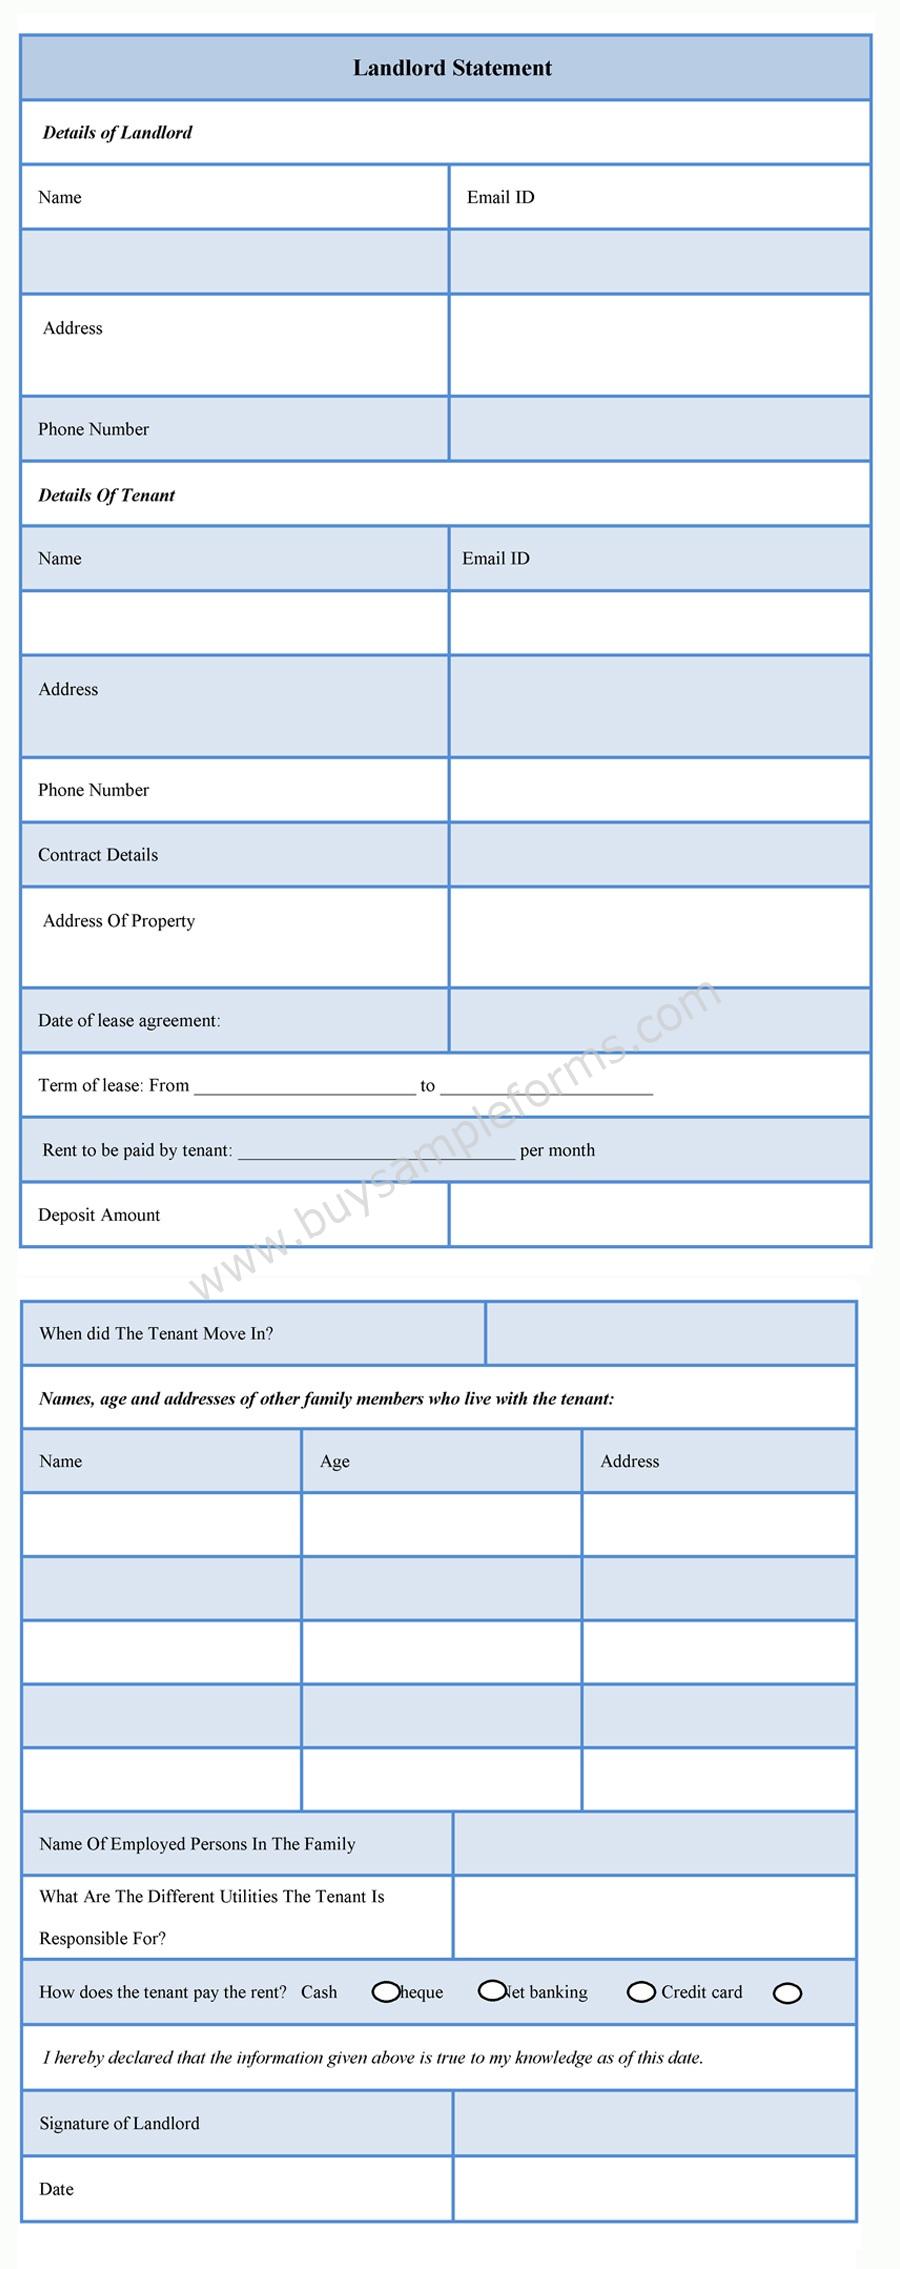 Landlord Statement form Template